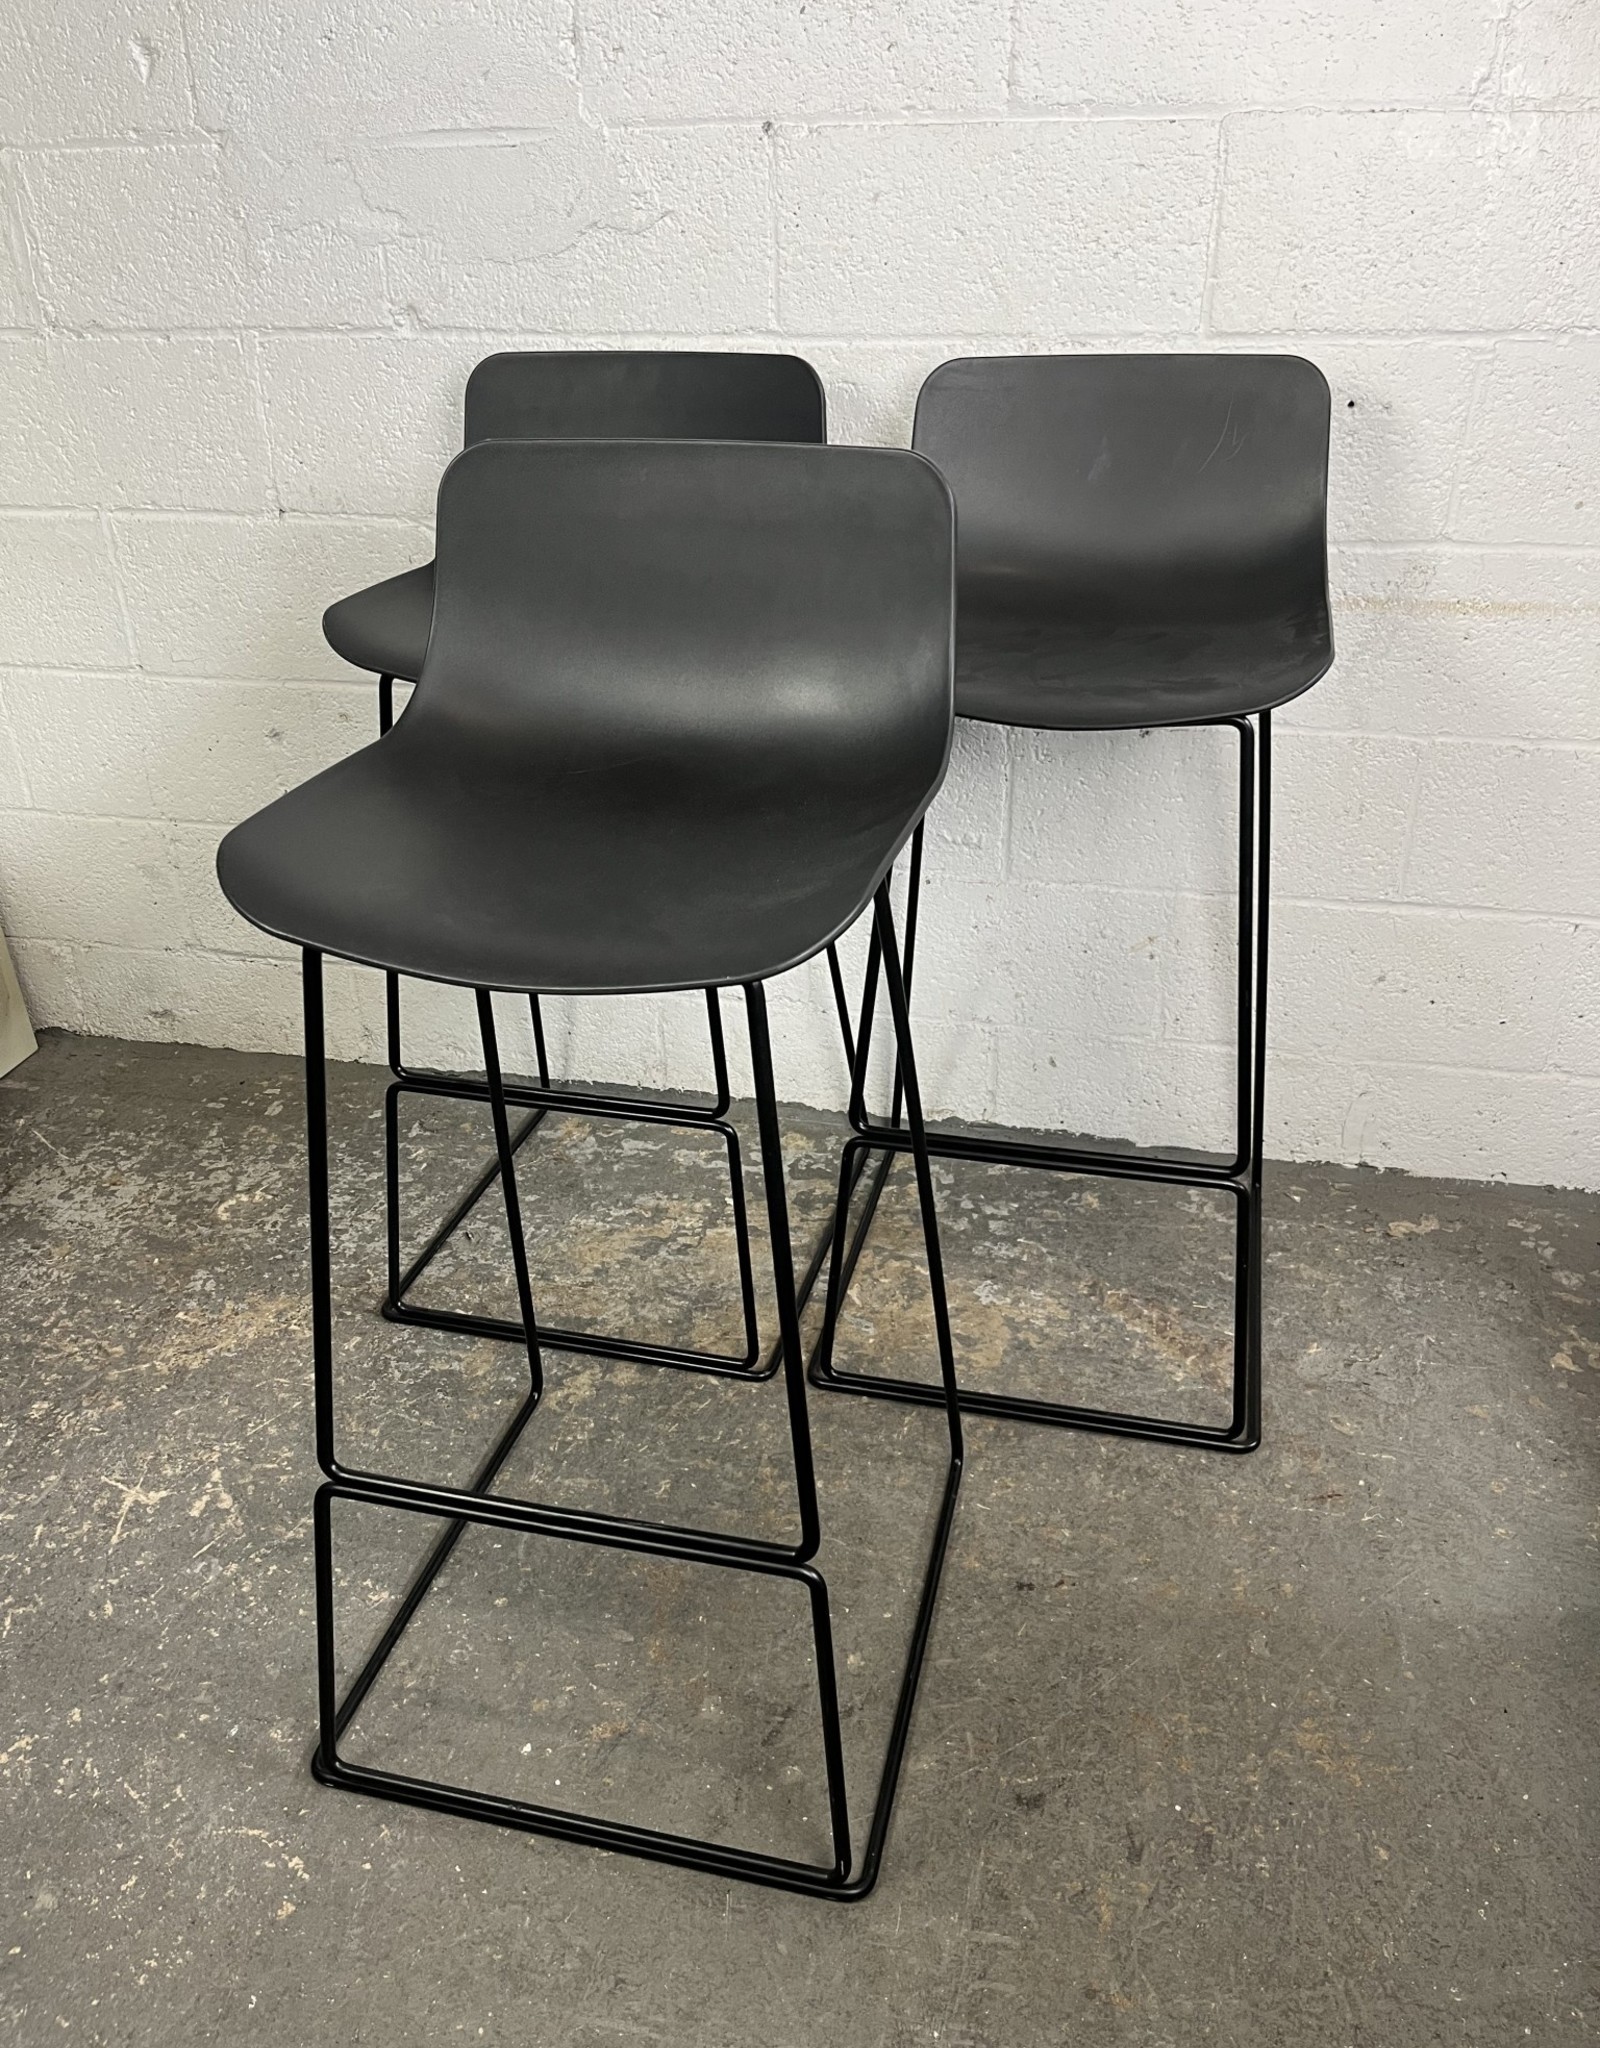 Article Article Stools (set of 3)